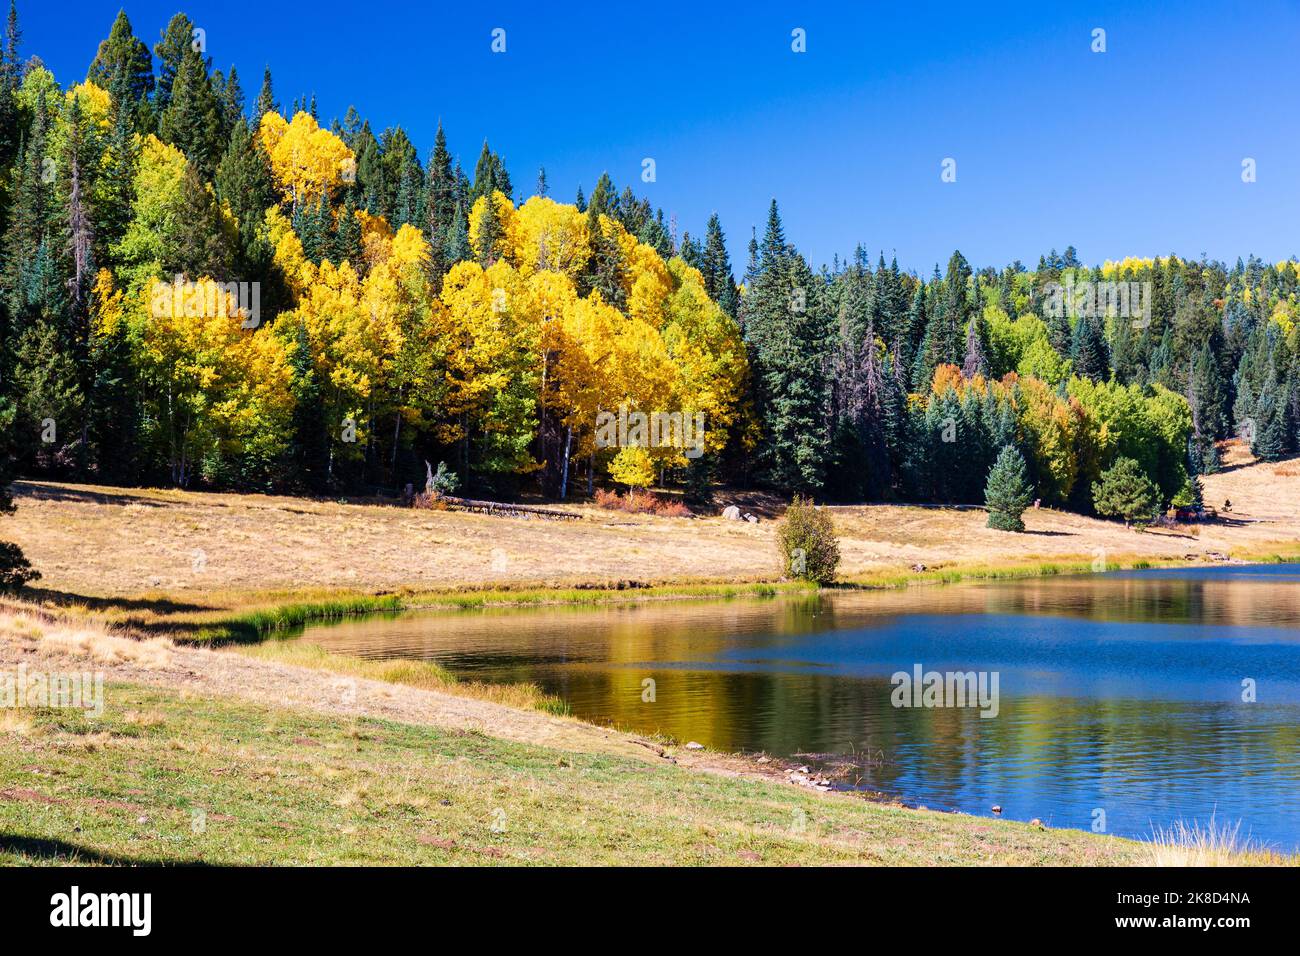 A colorfuil Autumn scene along the shore of Reservation Lake on the Apache White Mountain Apache tribal lands in the White Mountains of Arizona. Stock Photo